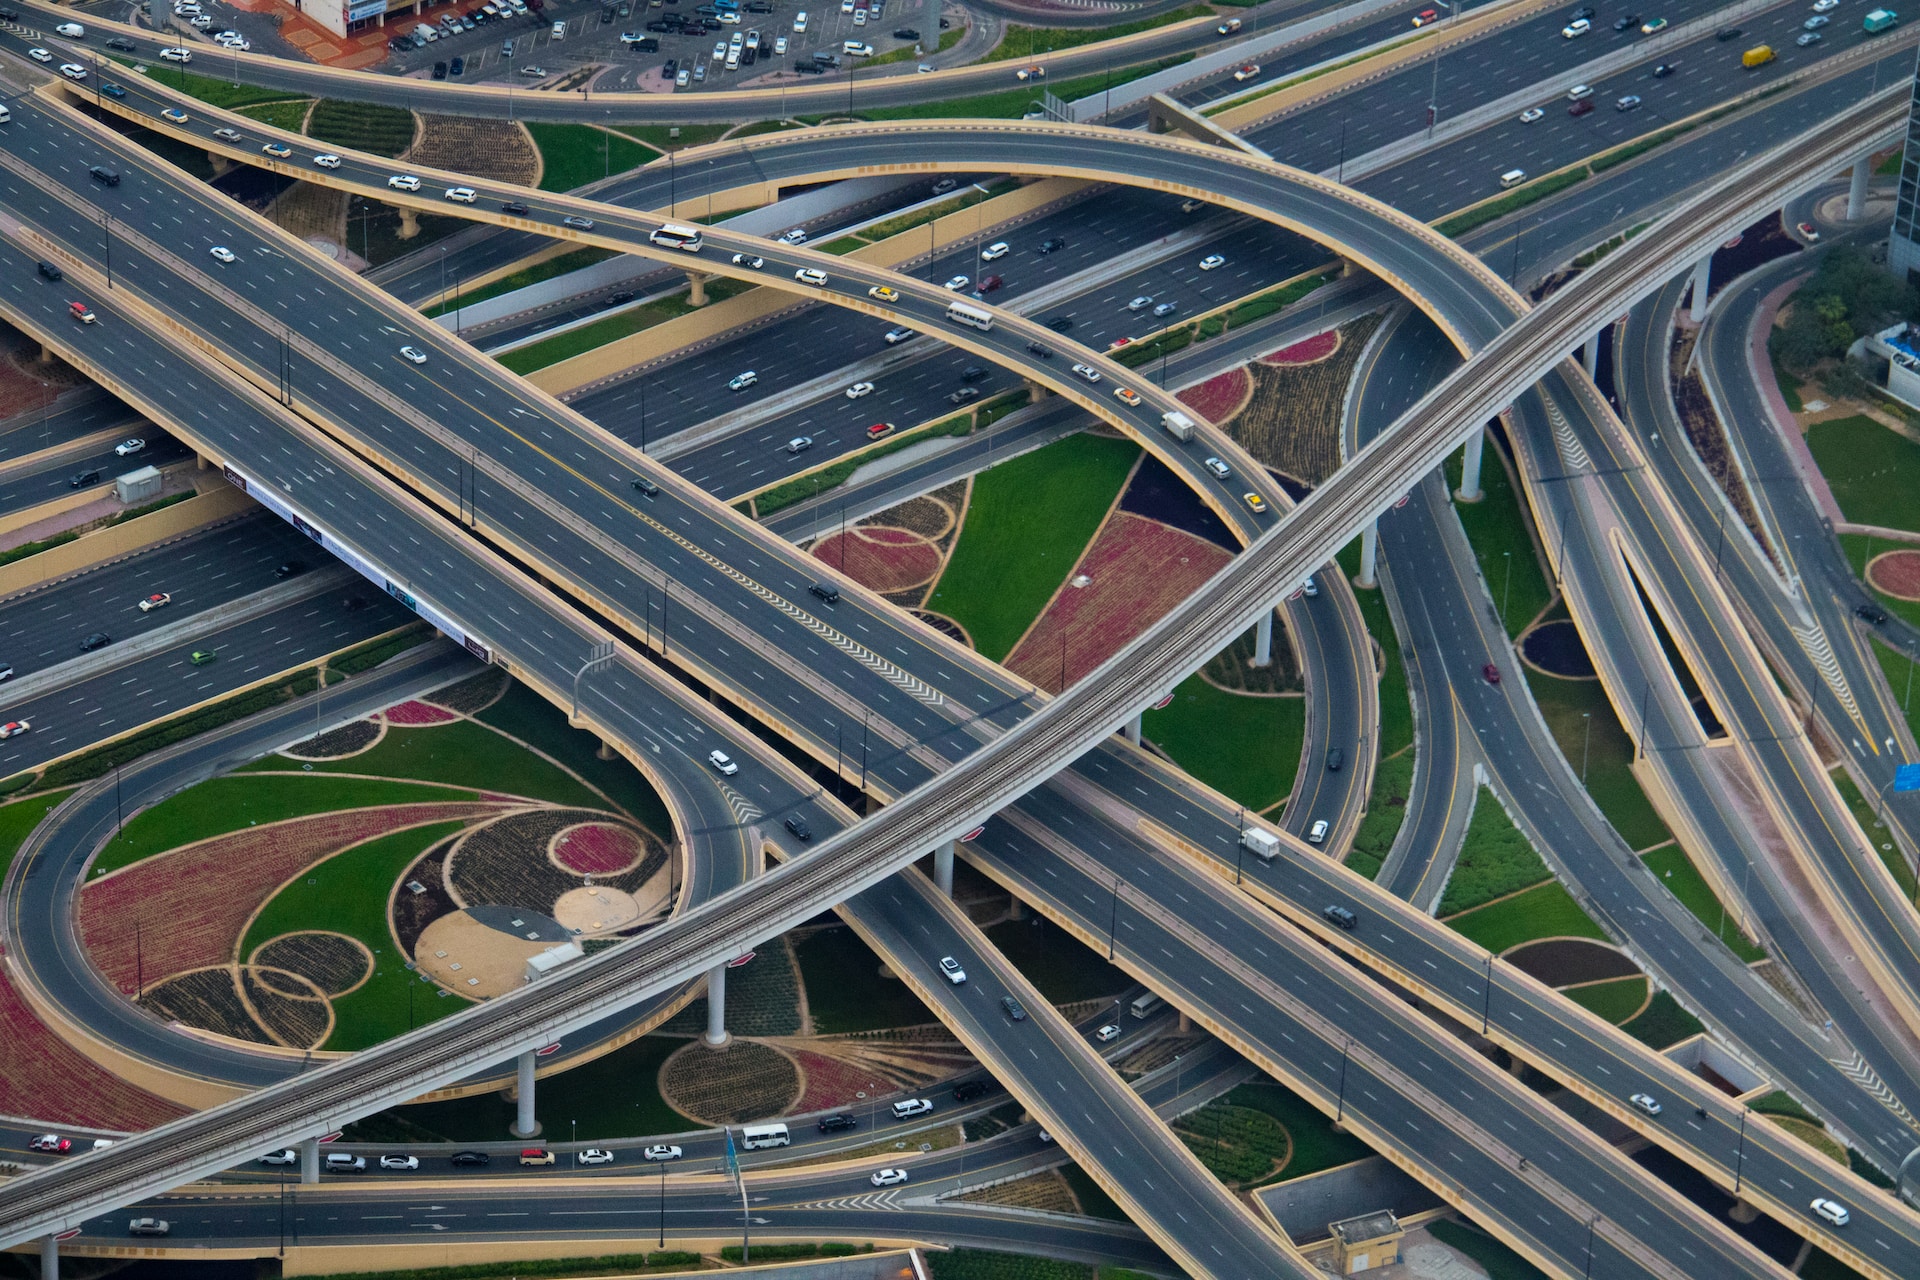 An image of a complex highway intersection in Dubai